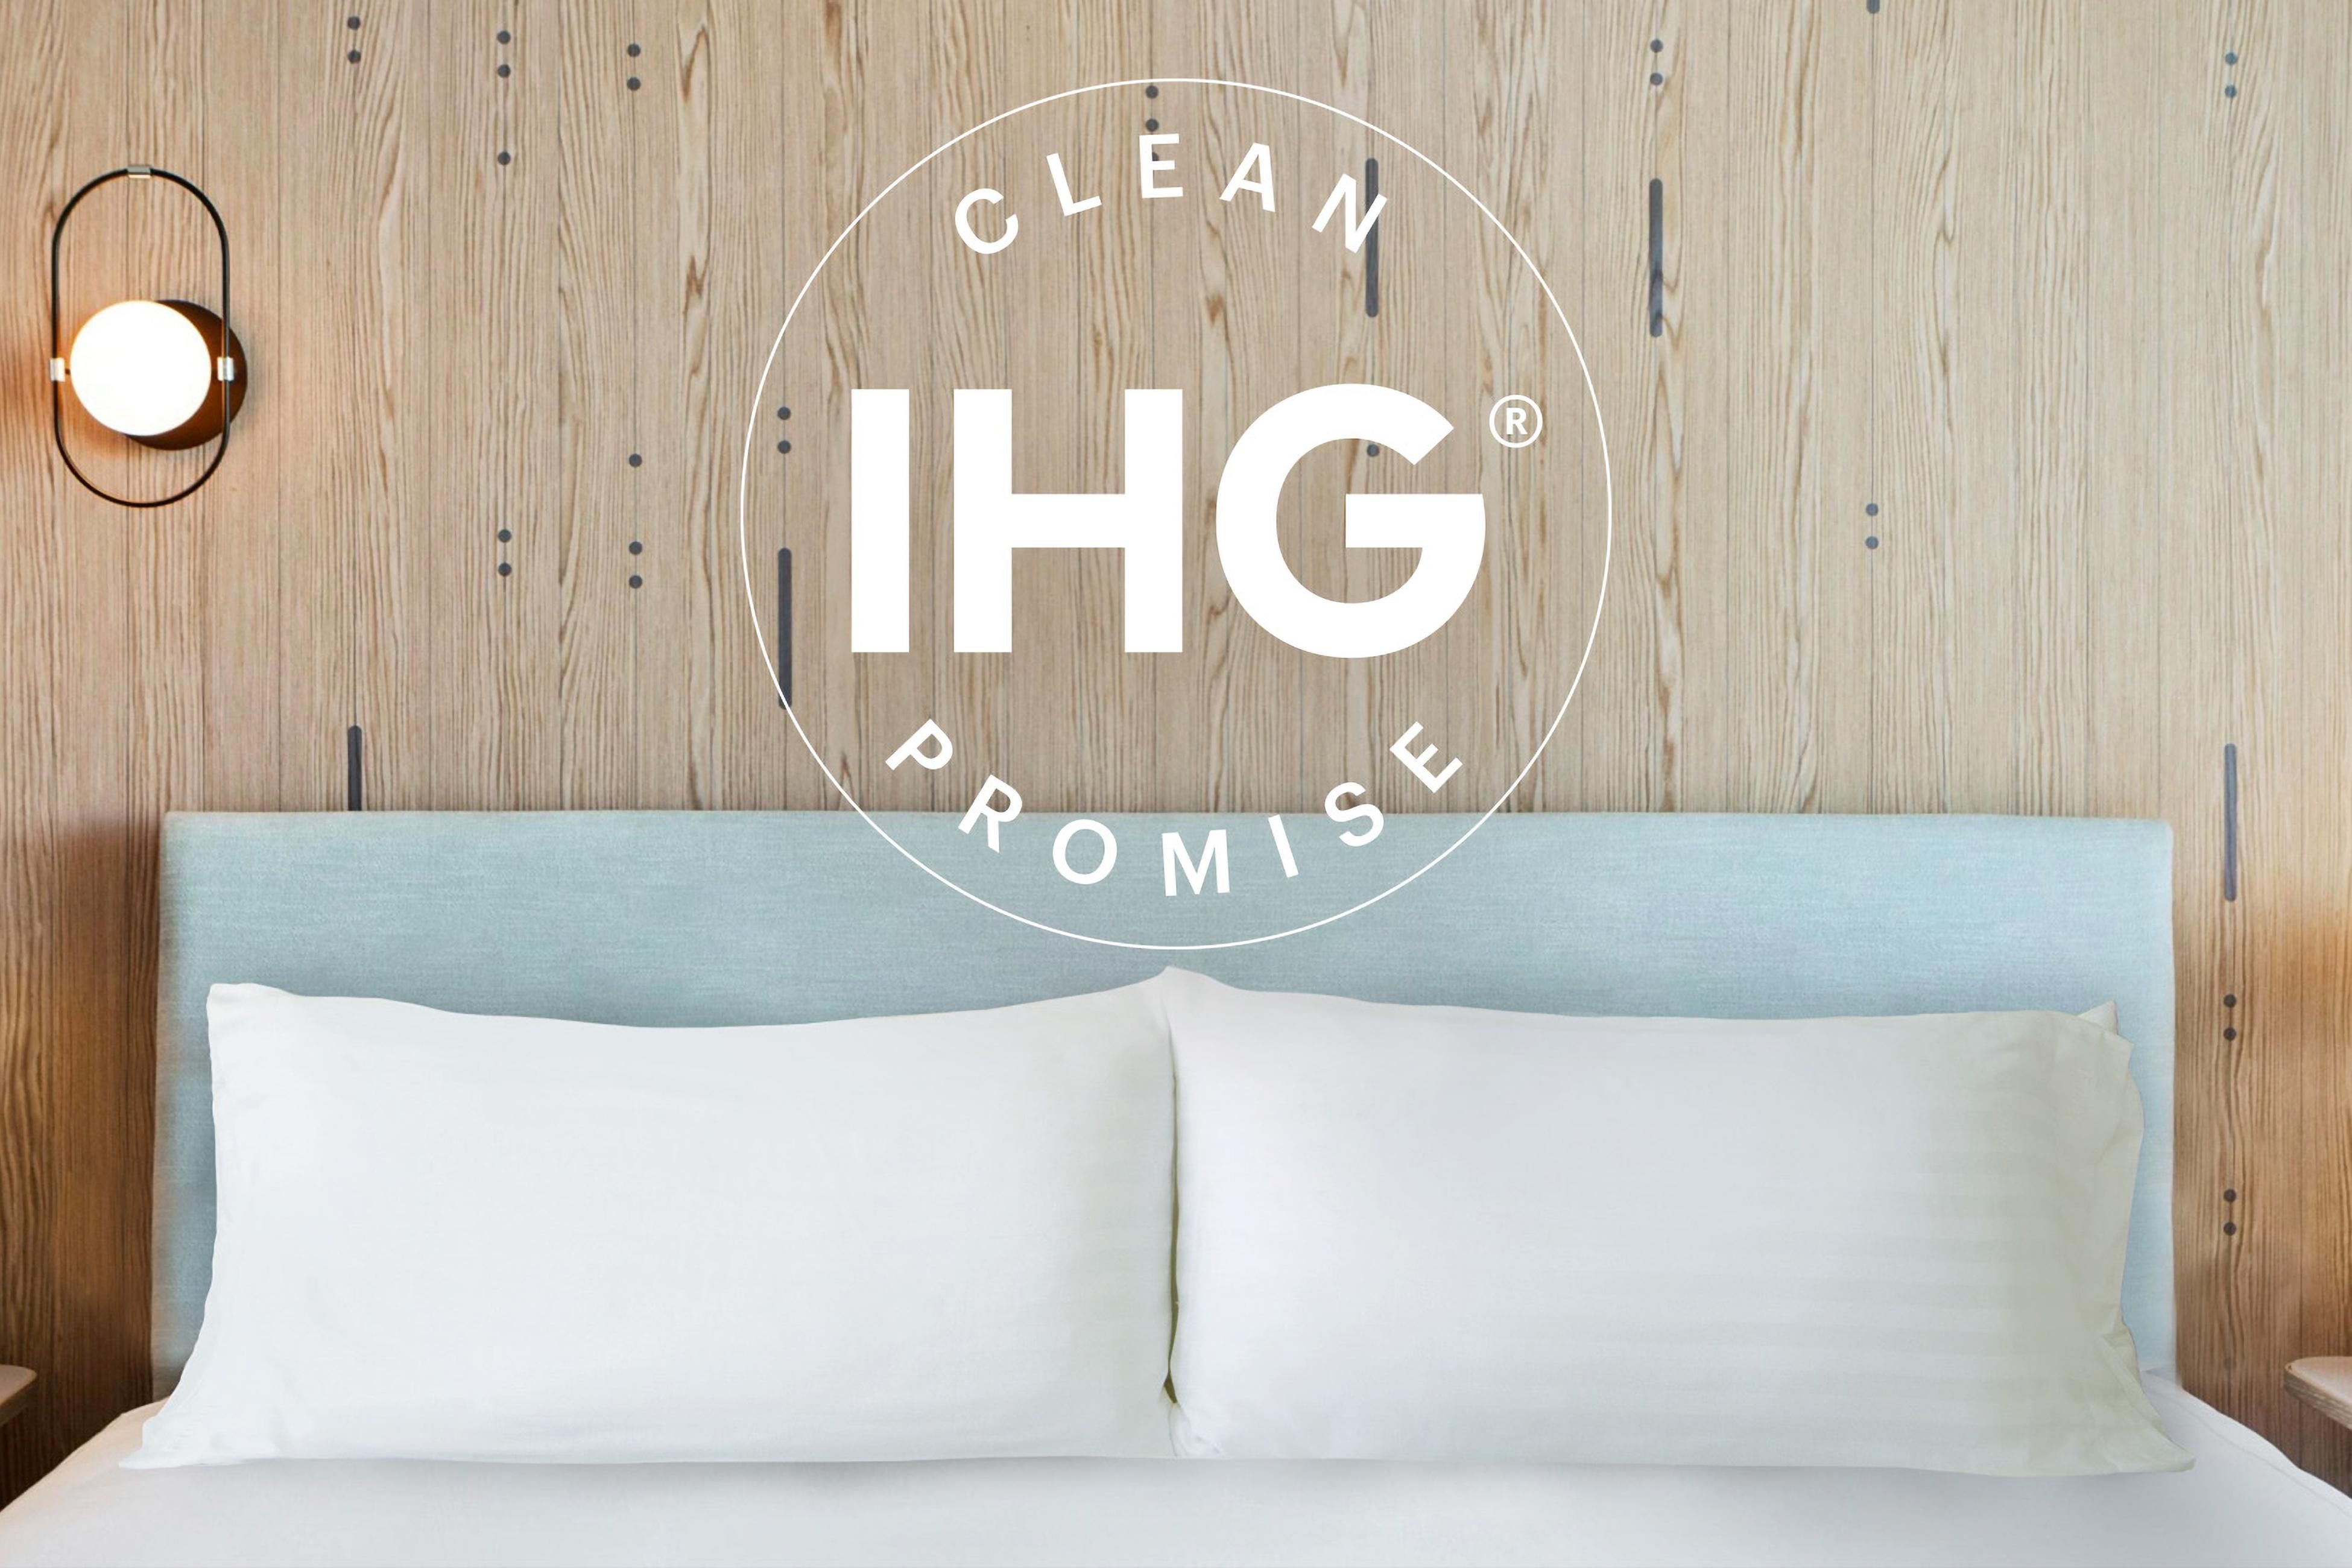 The Staybridge Suites Atlanta-Midtown is proudly participating in the IHG Clean Promise program. The hotel has implemented new science-led protocols and partnered with industry leading experts. These strengthened procedures are designed to give you greater confidence and our team the protection needed.